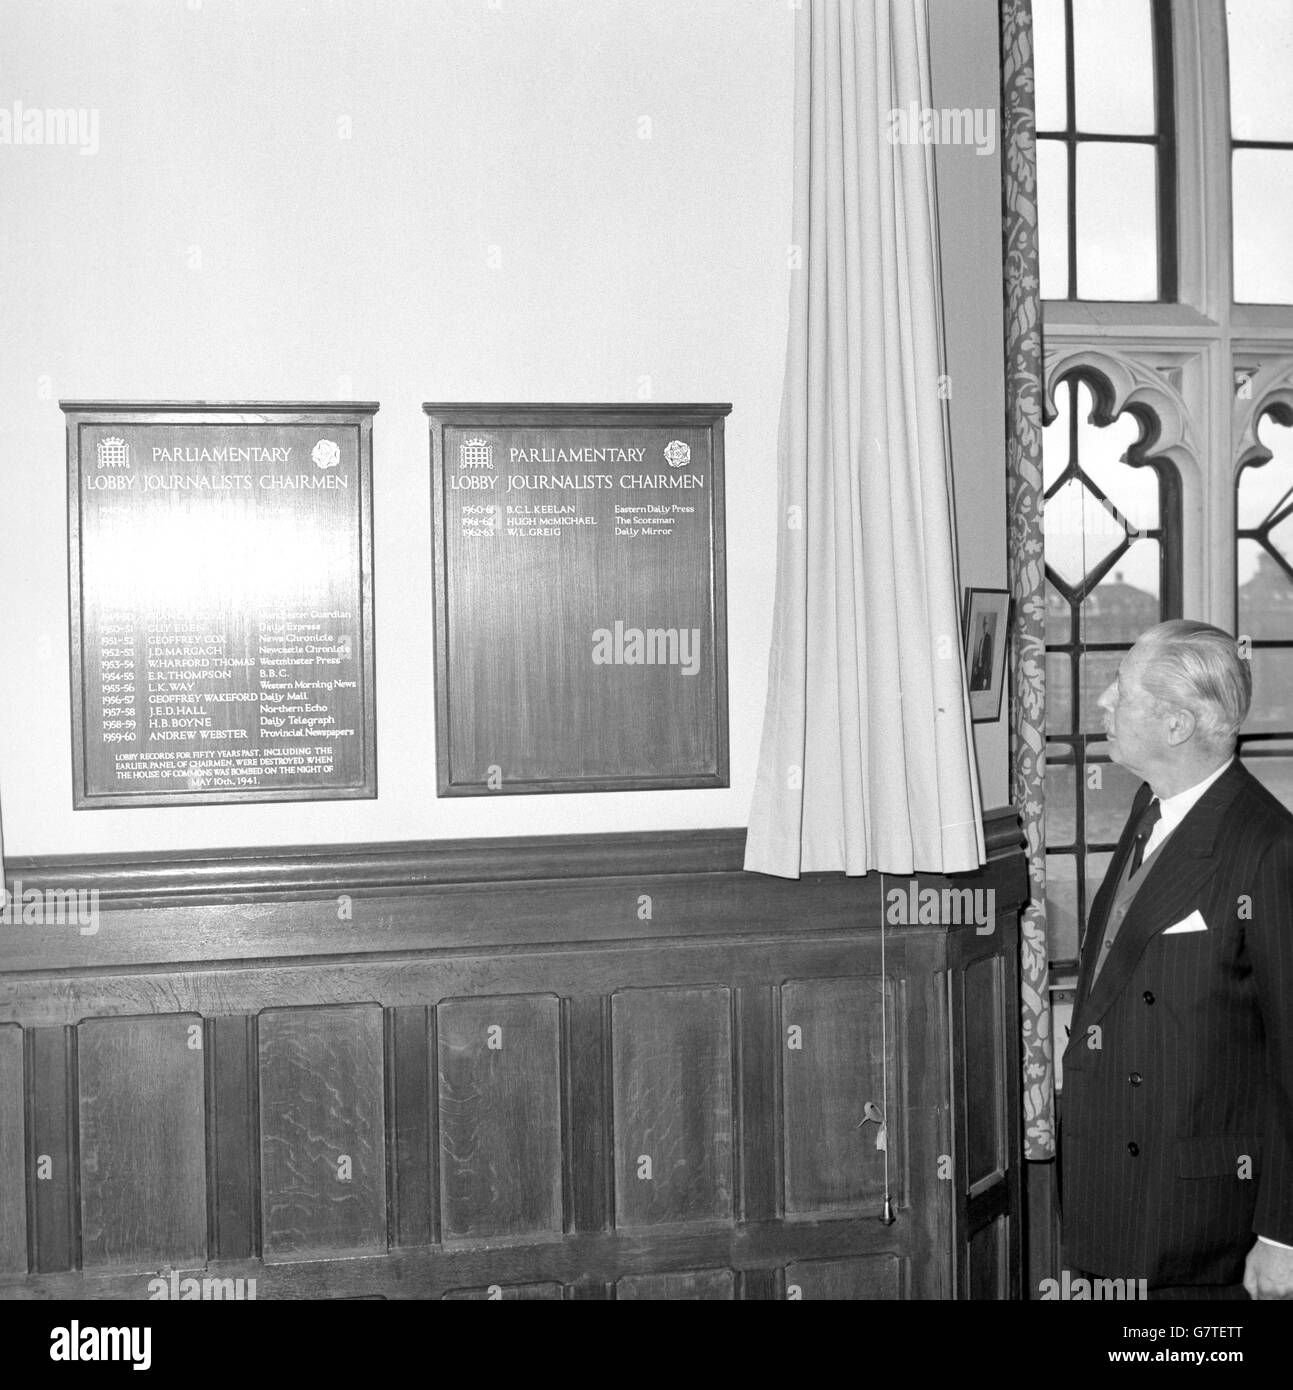 Harold MacMillan, Prime Minister, unveiling int he Lobby Correspondent's Room at the House of Commons, London, panels with the names of the Chairmen of the Parliamentary Lobby Journalists going back to 1940. Previous records, dating back nearly 80 years, were destroyed when the house was bombed on May 10th 1941. The Prime Minister stressed the confidence and comradeship which had always existed between Lobby correspondents and MP's. 'I do not think that old tradition has been in any way departed from', he said. 'On the contrary, during my lifetime i think it has been strengthened'. Stock Photo